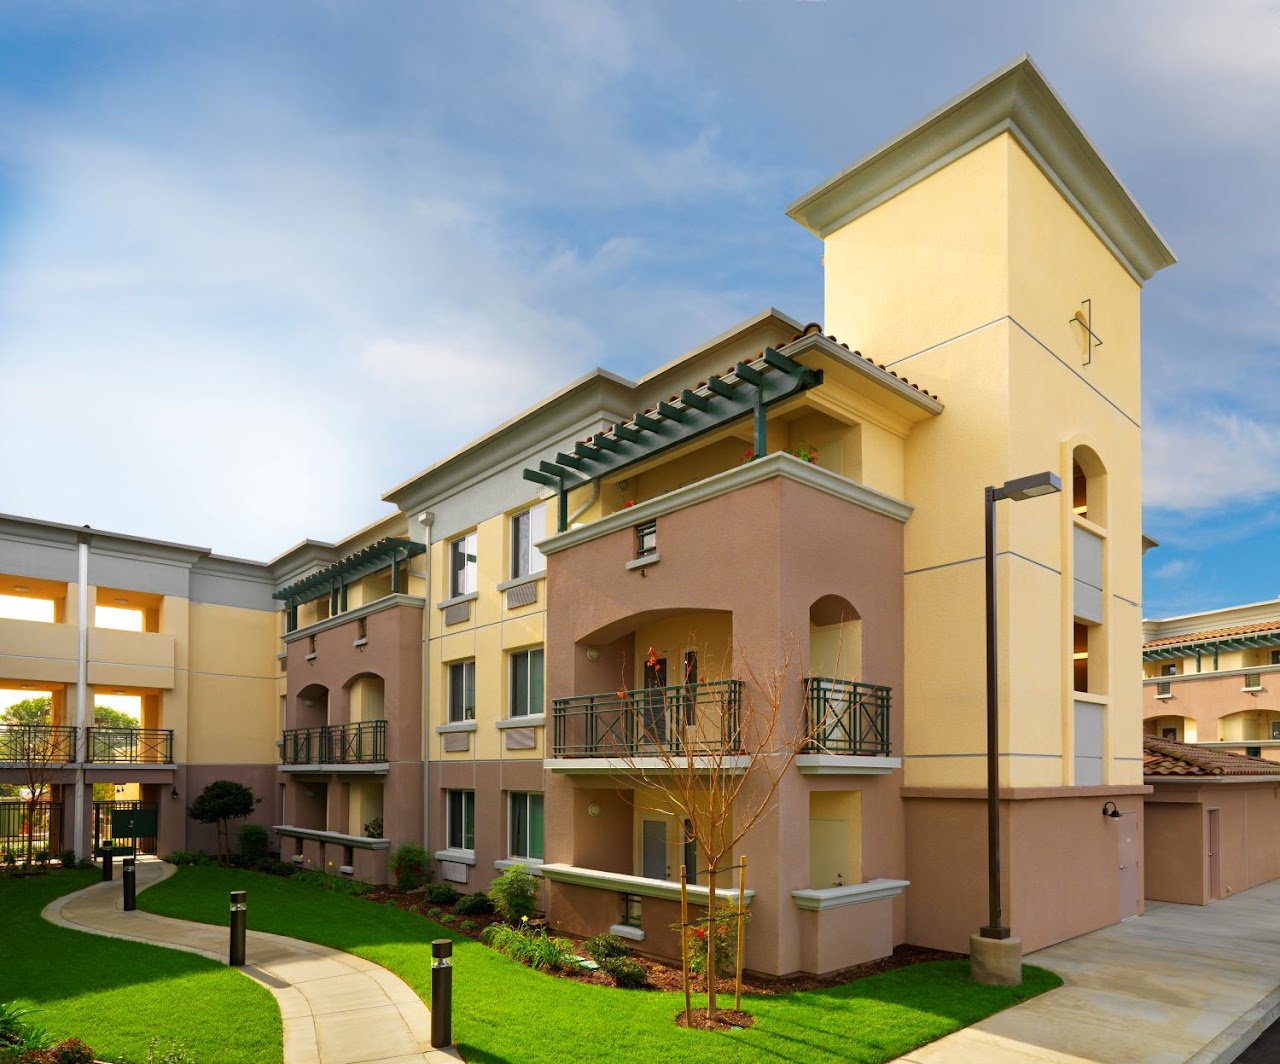 Photo of MONTCLAIR SENIOR HOUSING PROJECT. Affordable housing located at 10355 MILLS AVE MONTCLAIR, CA 91763